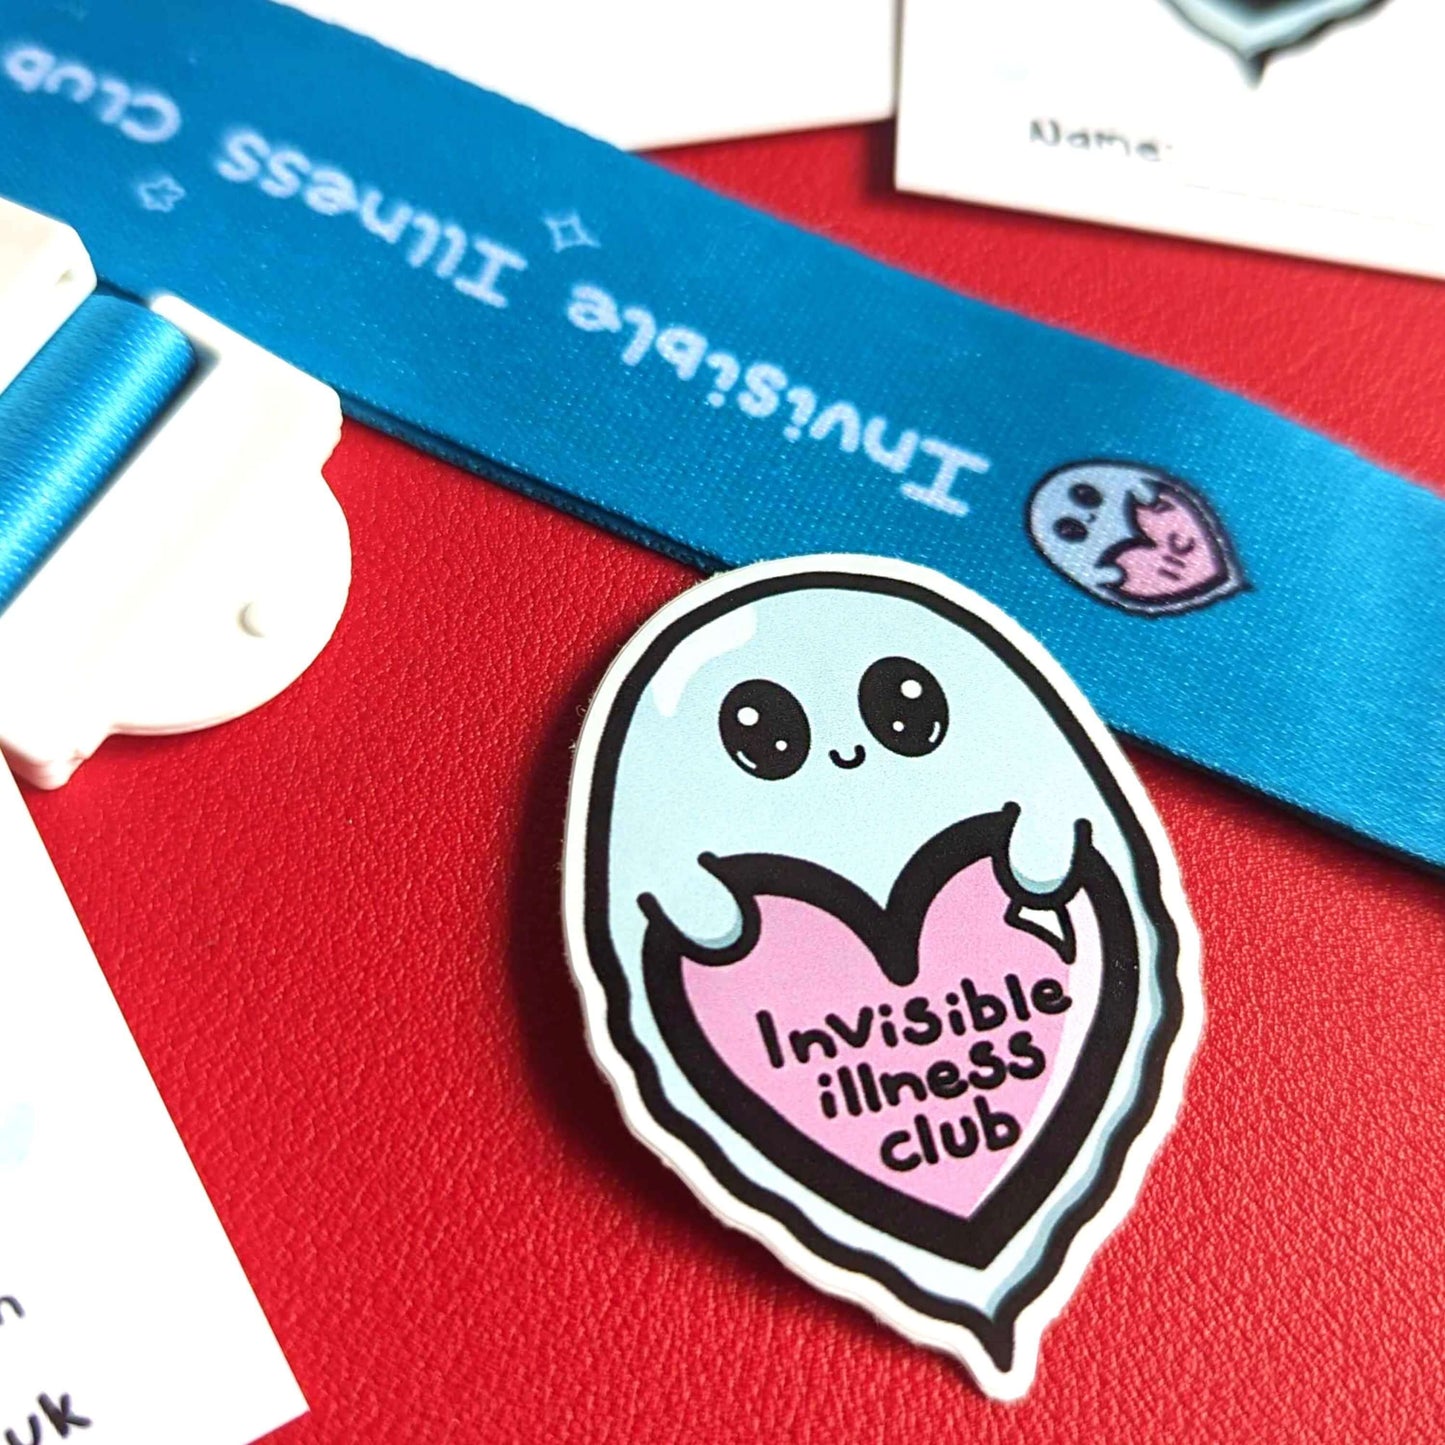 Invisible Illness Club vinyl sticker shown on red background. The sticker is in the shape of a cute mint green ghost with big eyes and little smile holding a pink heart with it's little hands that has 'invisible illness club' written in black writing in the middle of the heart.